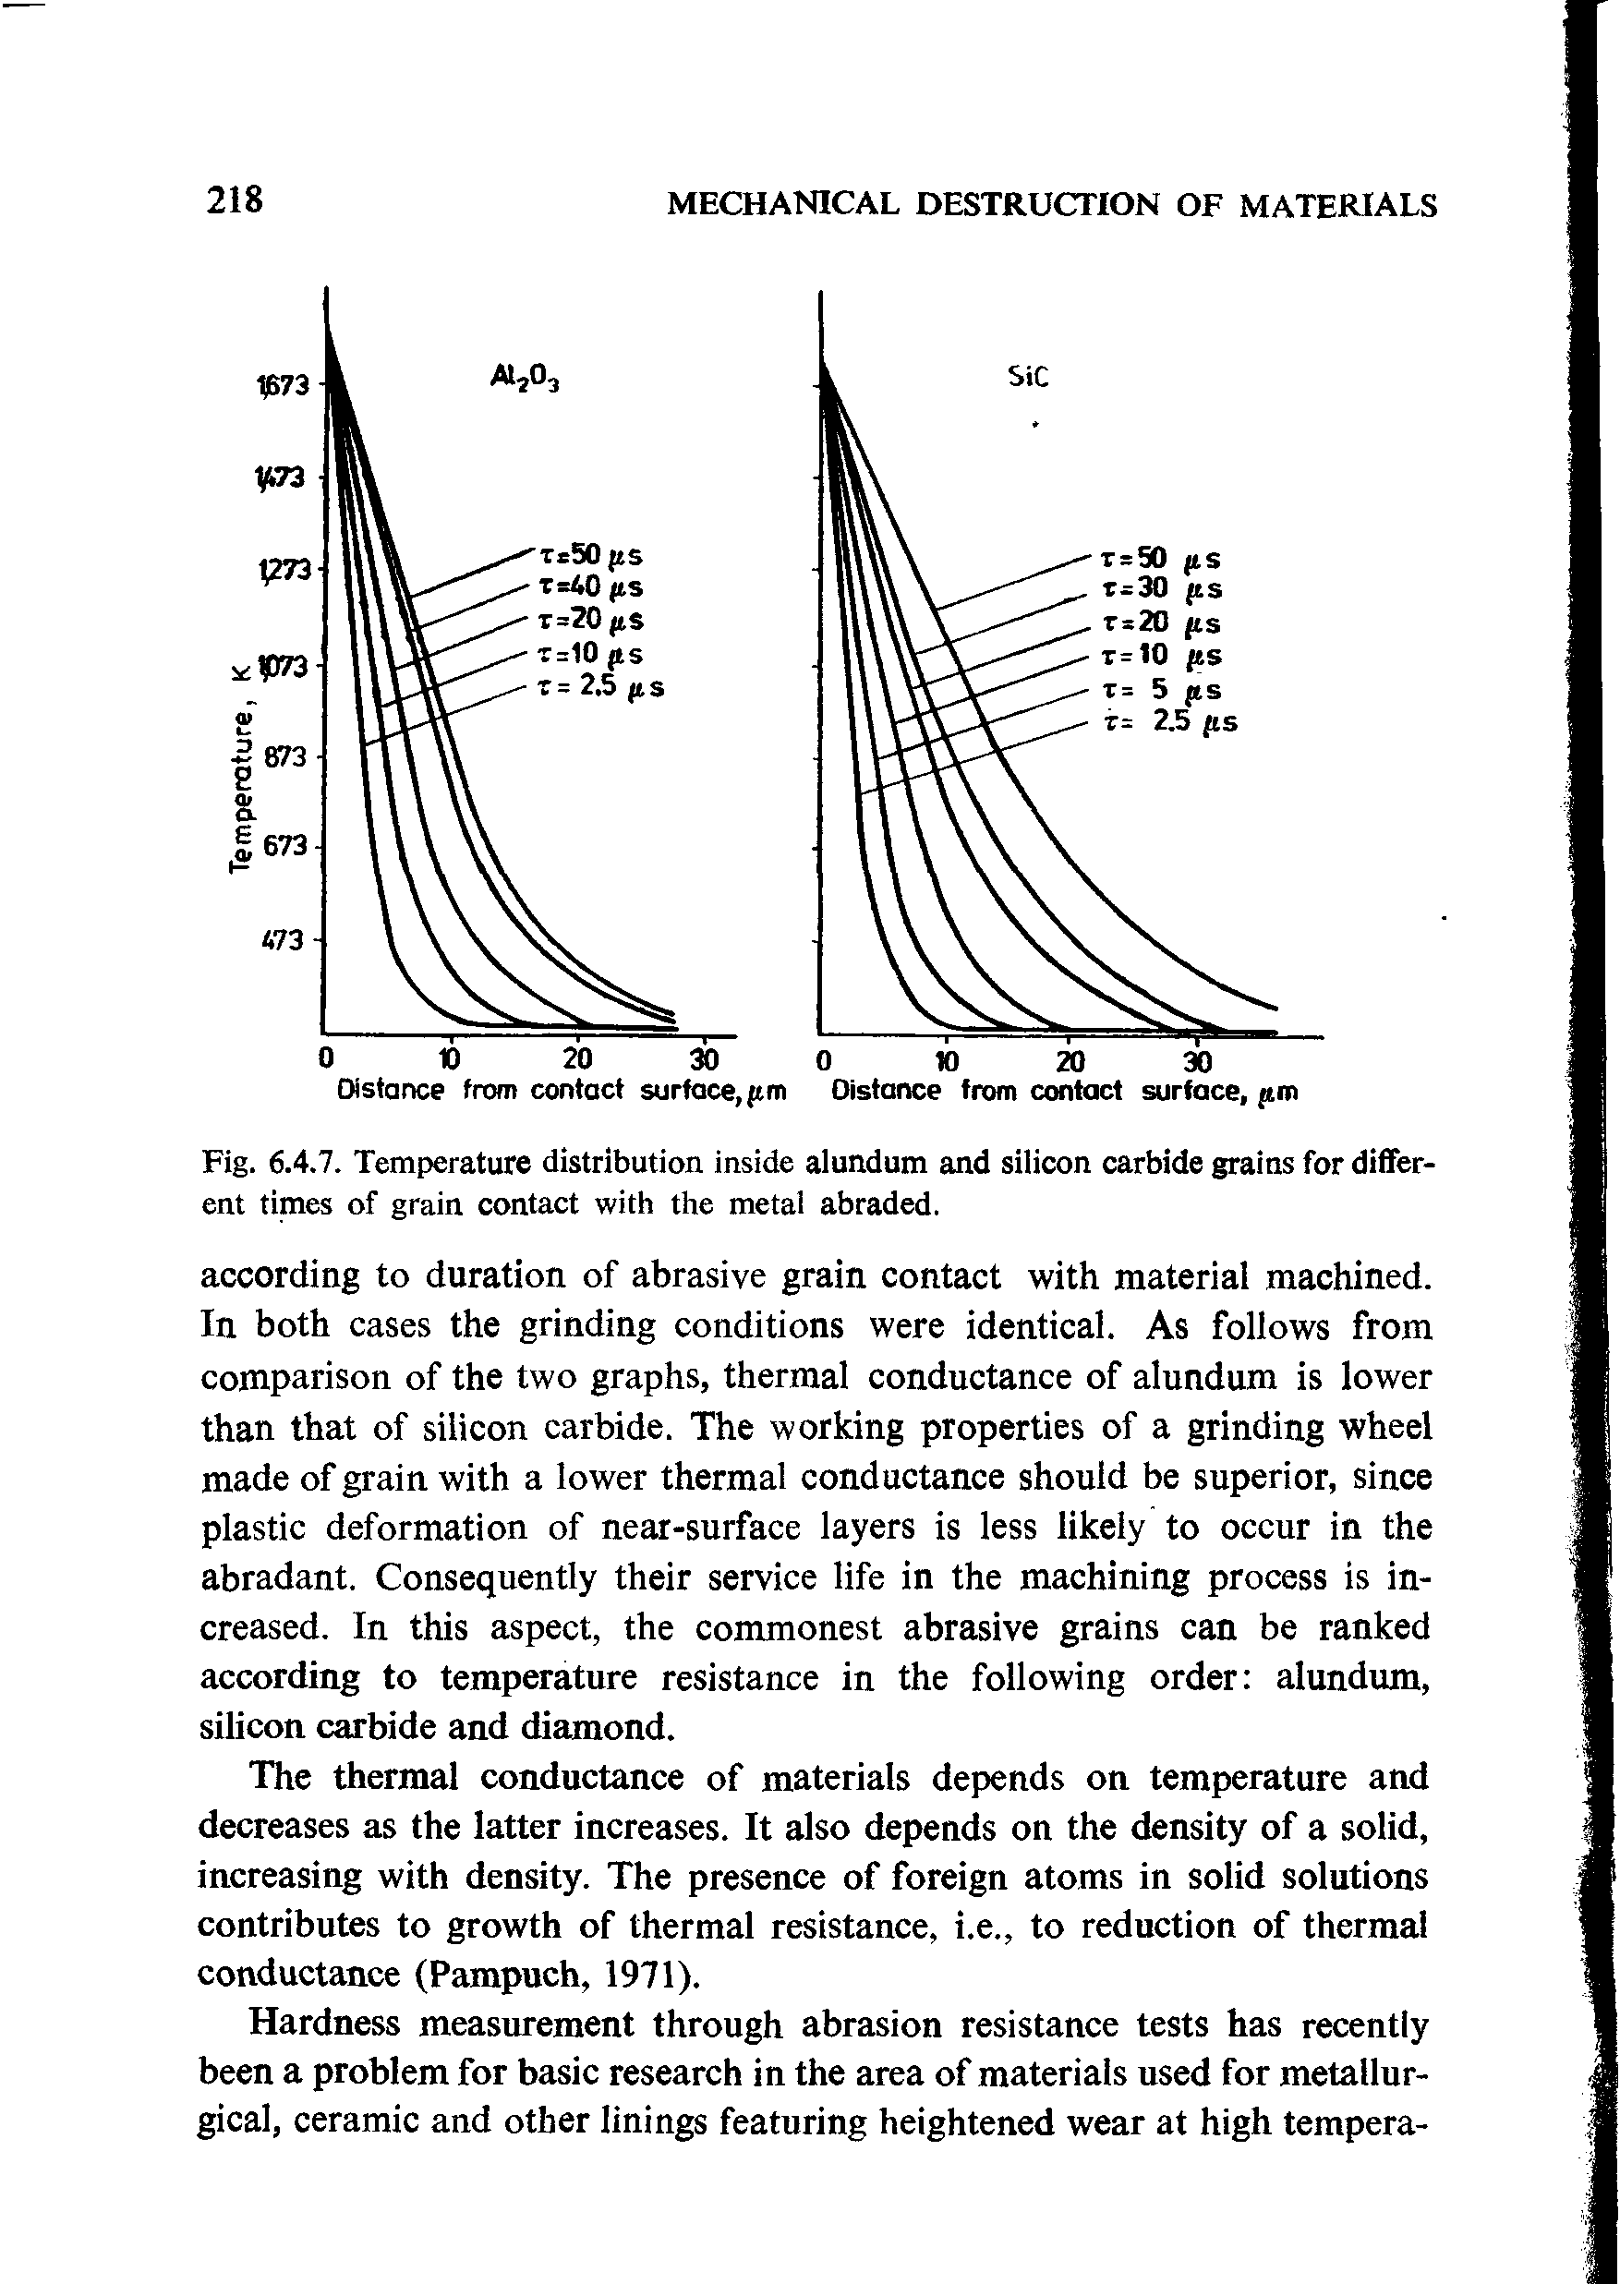 Fig. 6.4.7. Temperature distribution inside alundum and silicon carbide grains for different times of grain contact with the metal abraded.